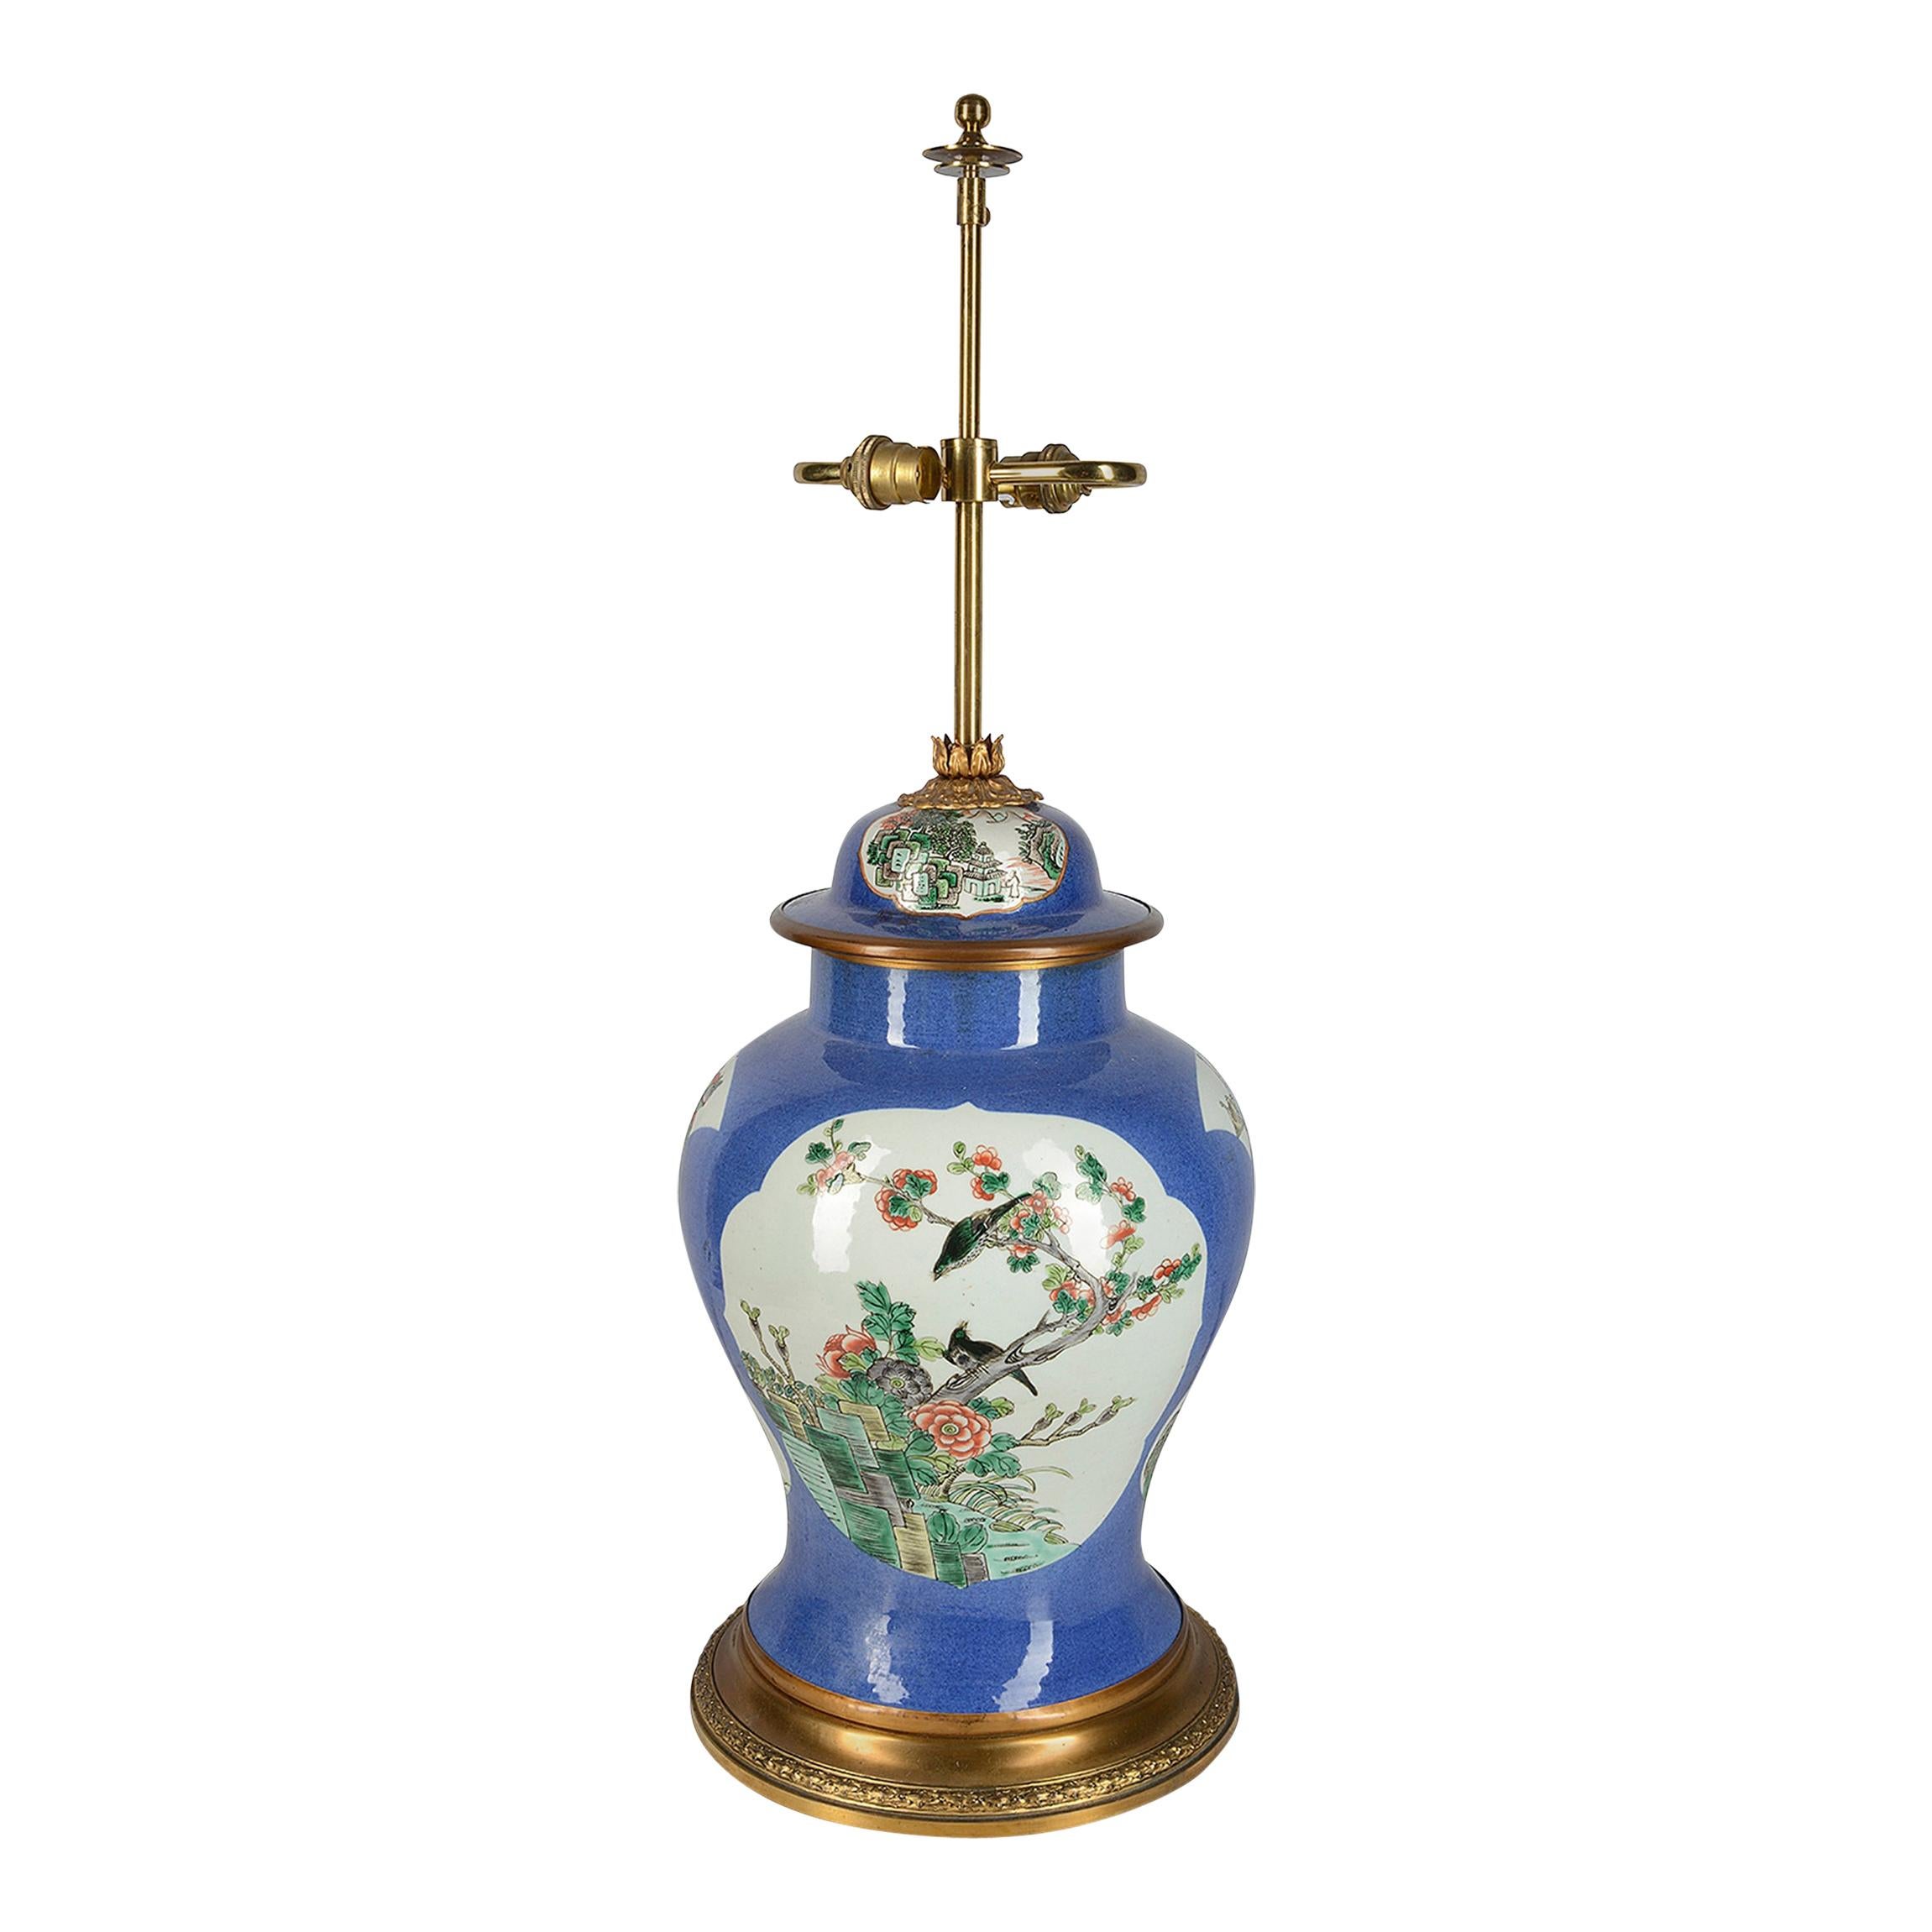 A very good quality Chinese 19th century Famille verte vase / lamp. Having a blue ground with inset painted panels depicting exotic flowers and birds. Mounted on an ormolu base with finial.